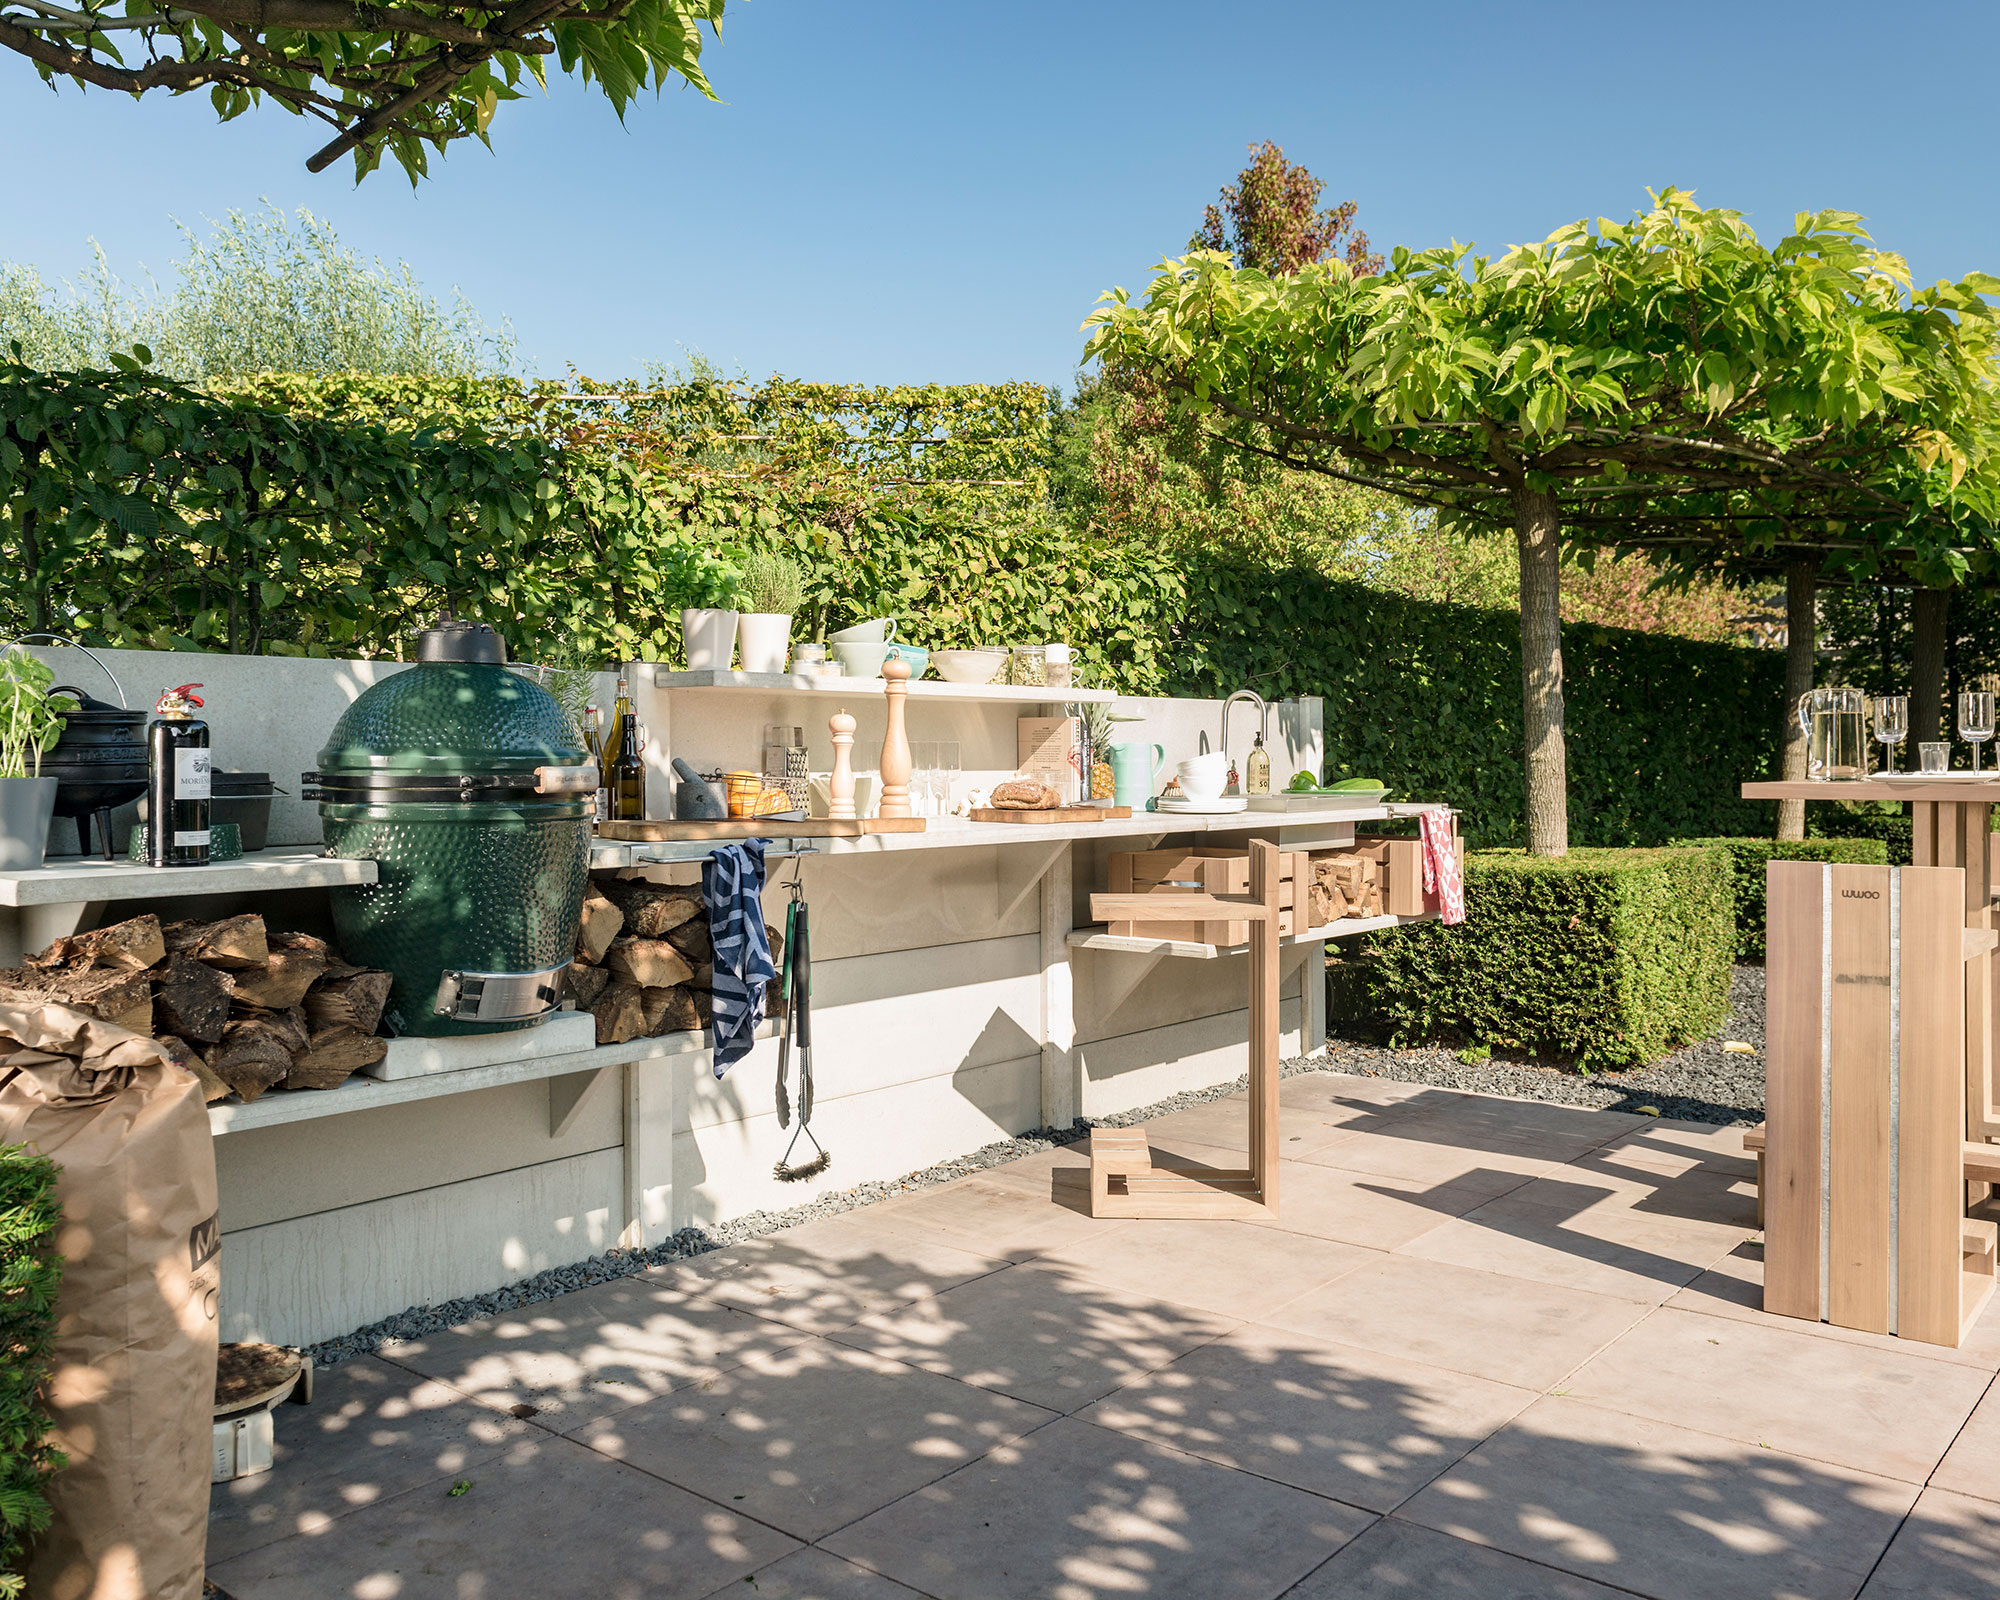 How Much Does An Outdoor Kitchen Cost, How Much To Build An Outdoor Kitchen And Patio